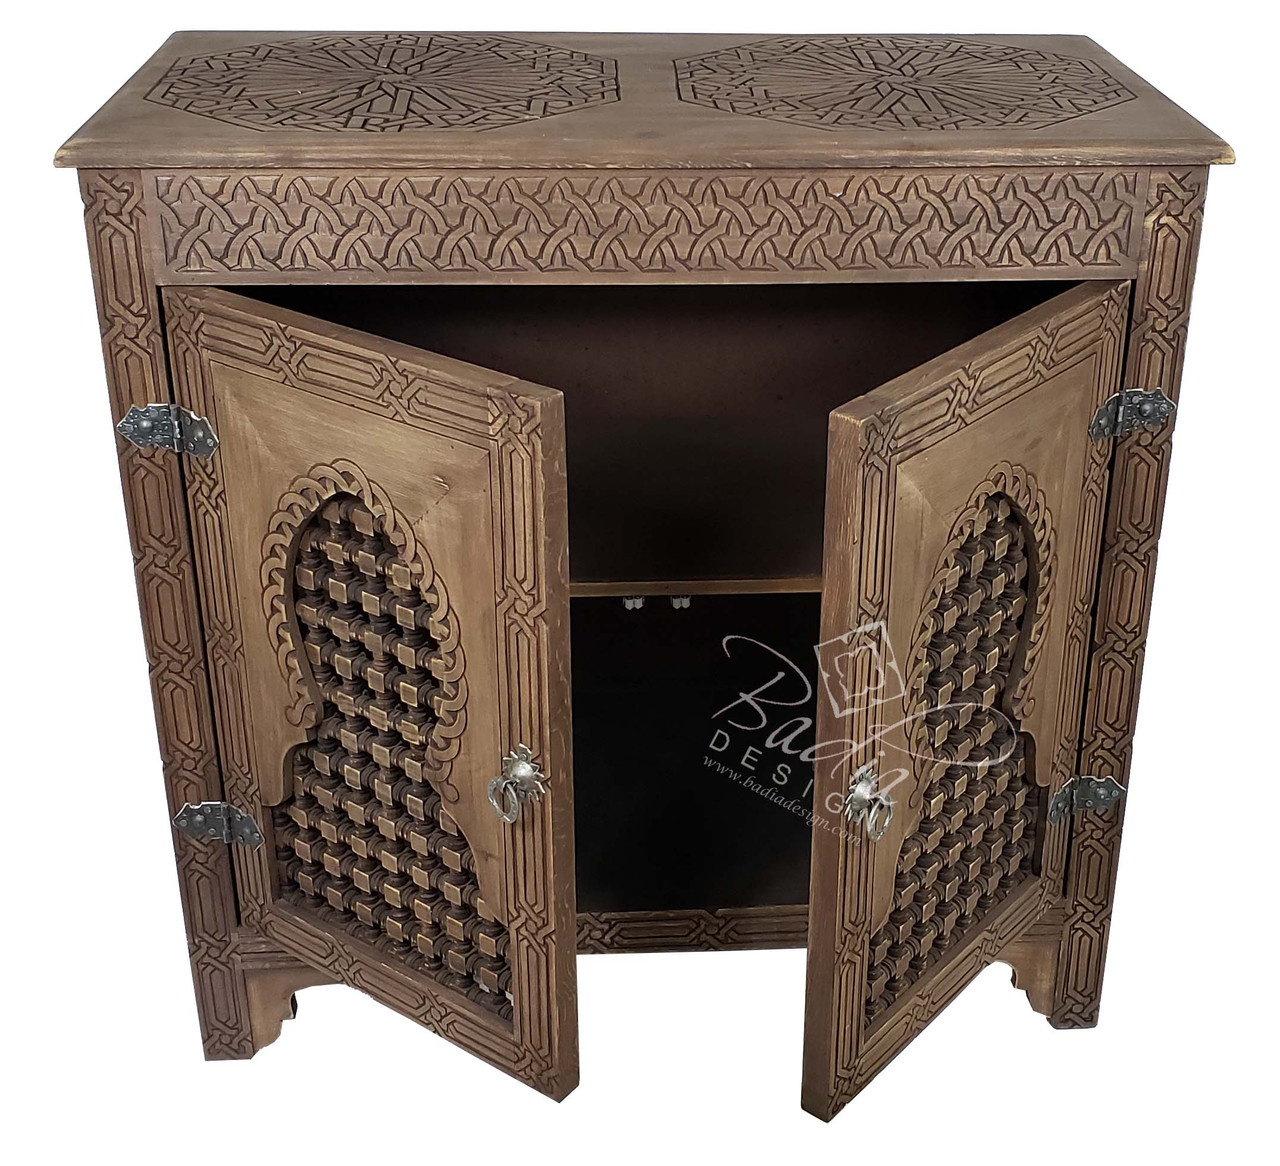 Two Door Hand Carved Wooden Cabinet - CW-CA092